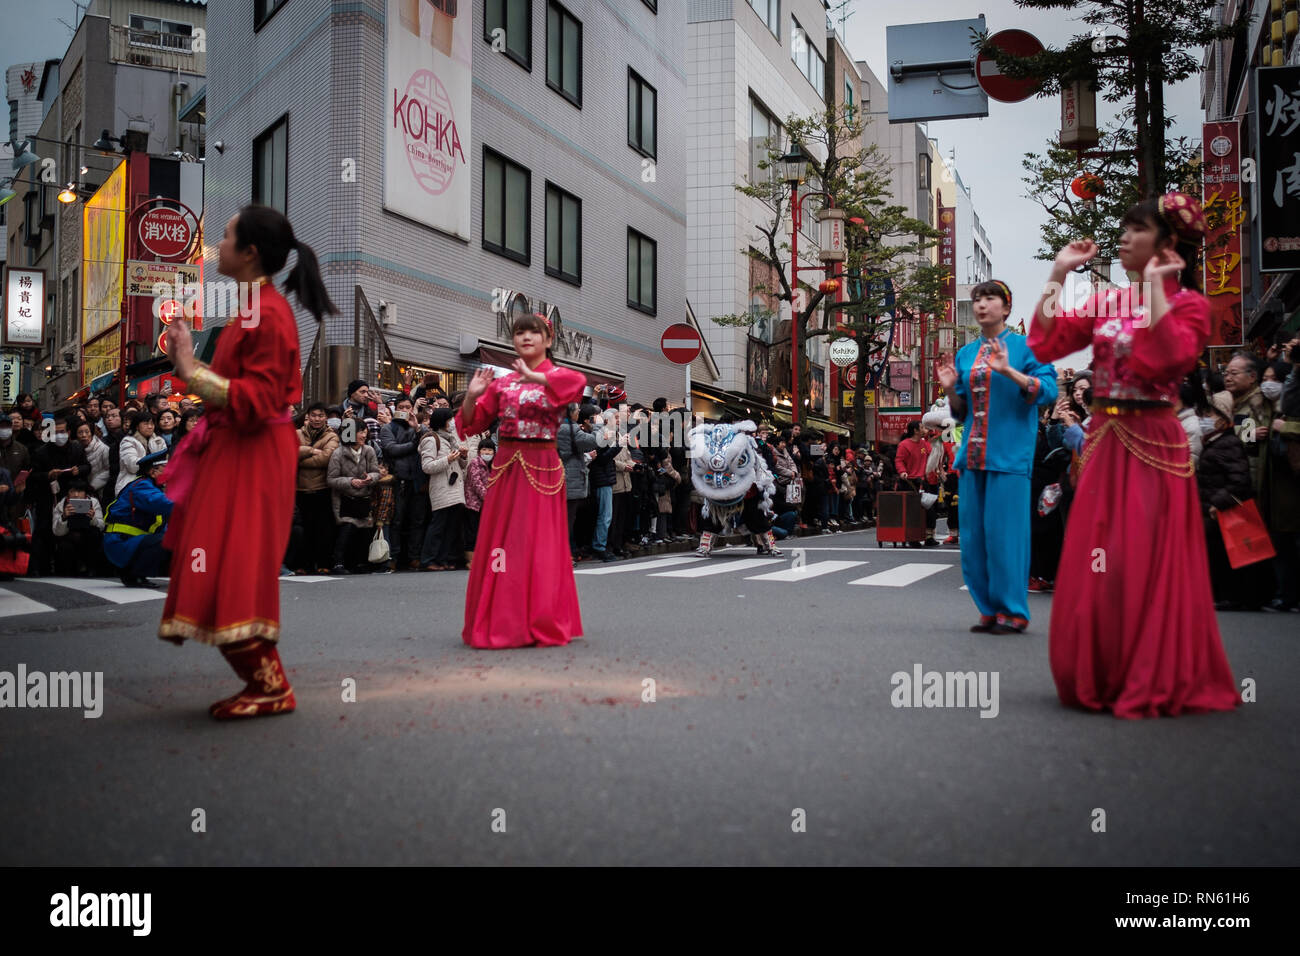 People parade in the street of Yokohama's Chinatown on February 16, 2019. Extravagant parade to celebrate the New Year with costumes of the Emperor, ethnic clothing, lion dance, and dragon dance. February 16, 2019 Credit: Nicolas Datiche/AFLO/Alamy Live News Stock Photo